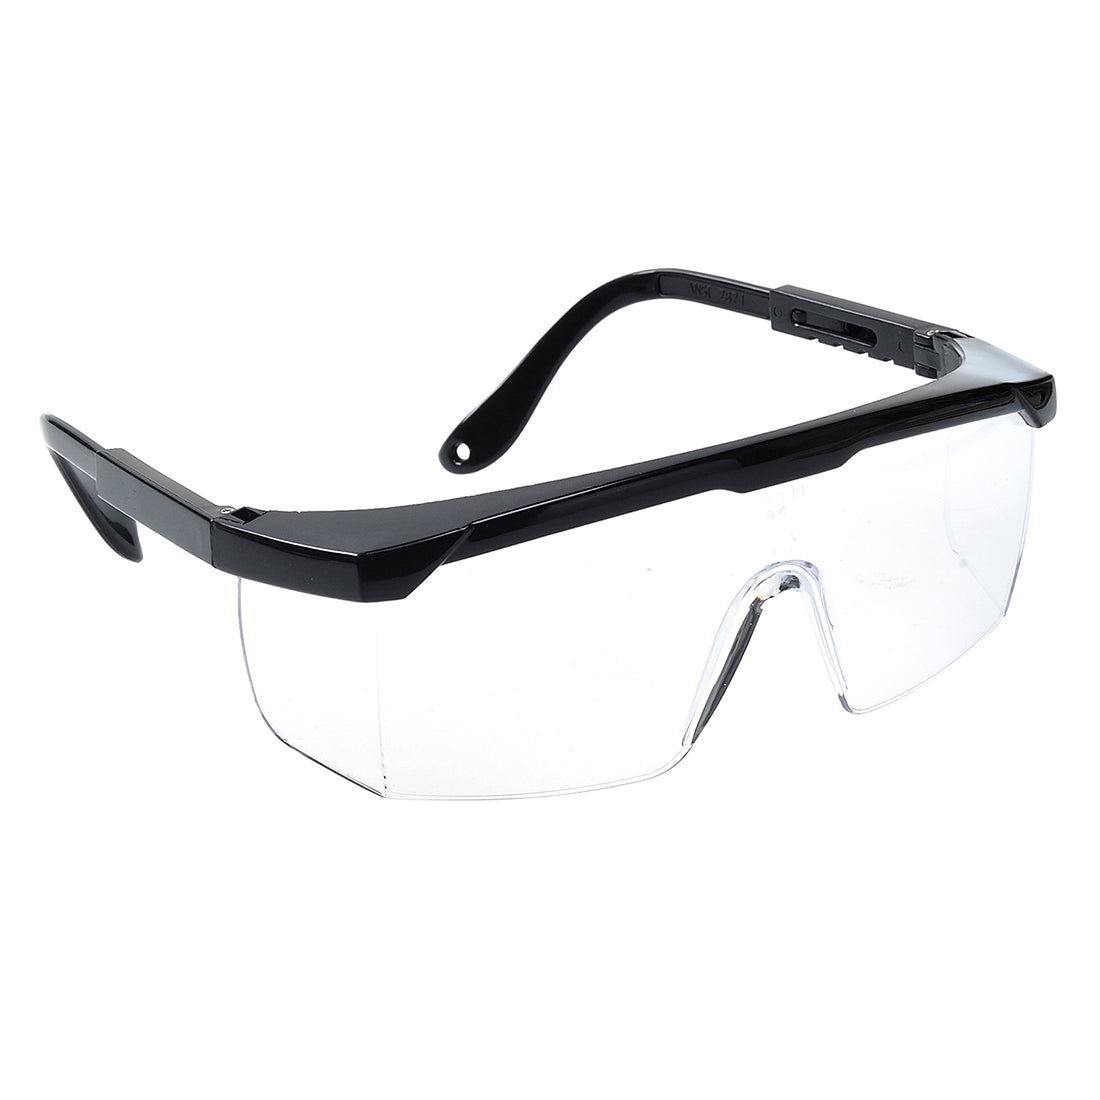 PW33 - Classic Safety Glasses (Pack of 10)